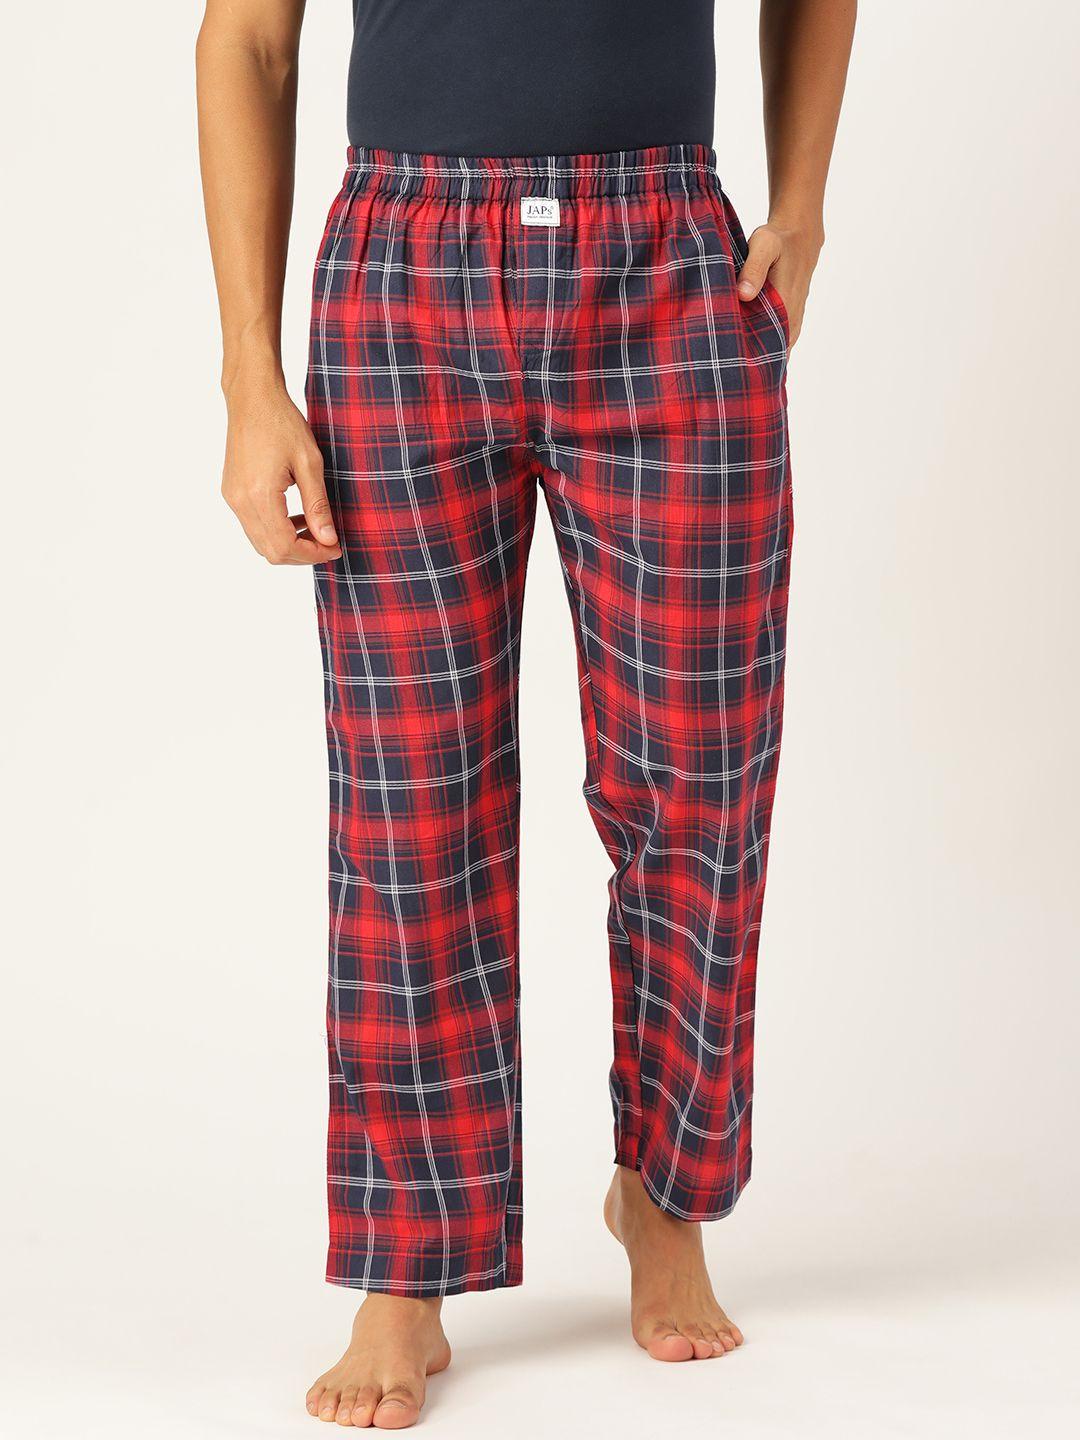 japs men red & navy blue checked cotton lounge pants